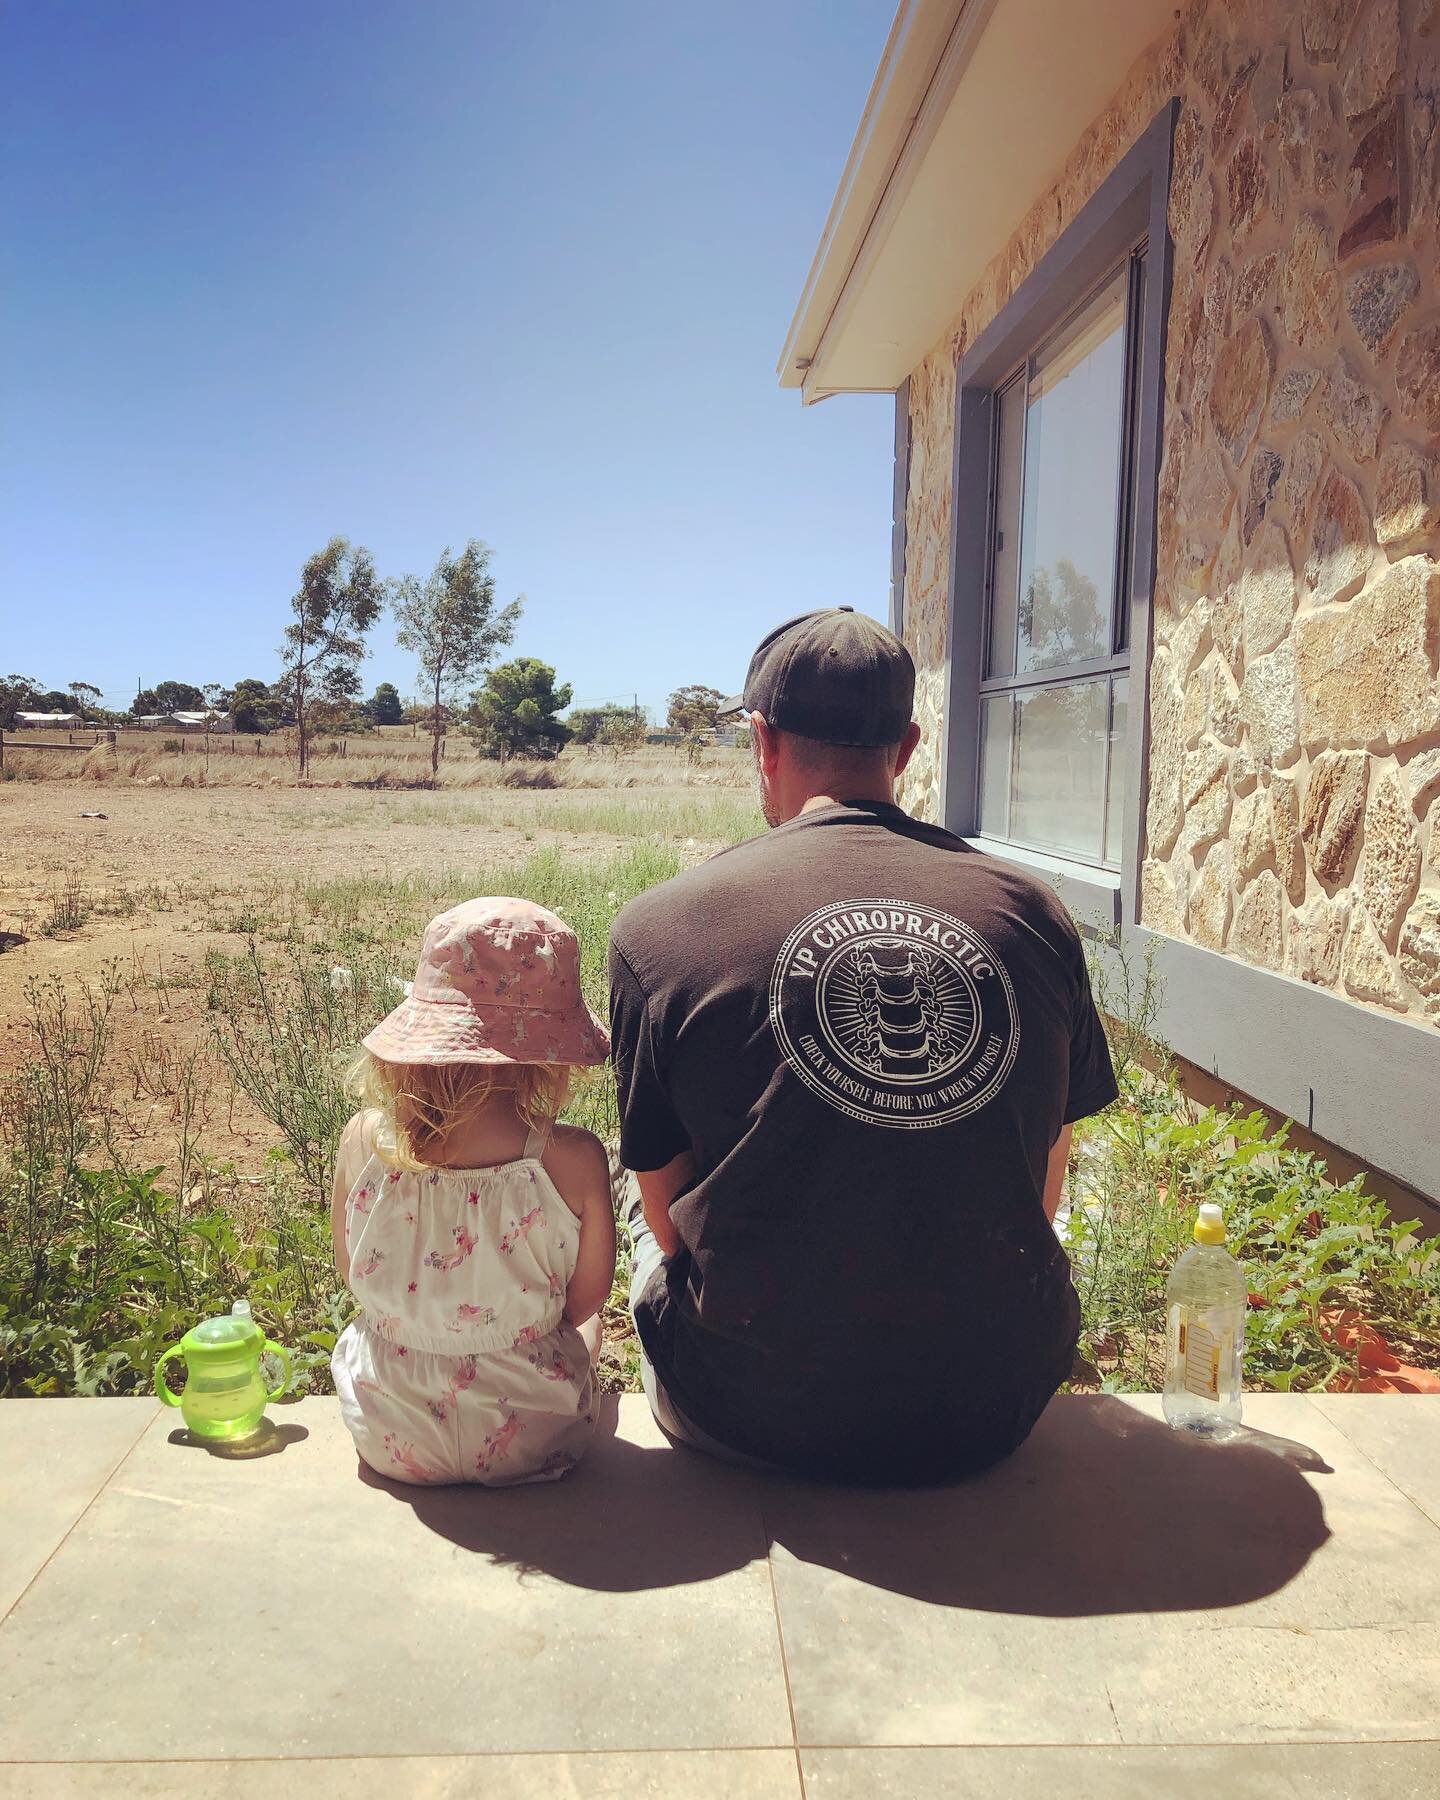 It is always important to take a break and rehydrate plus stopping and smelling the weeds. Great having a little helper today. Truly blessed. #help #sunshine #sun #vitamind #littleone #helper #dad #daddydaughter #blessed